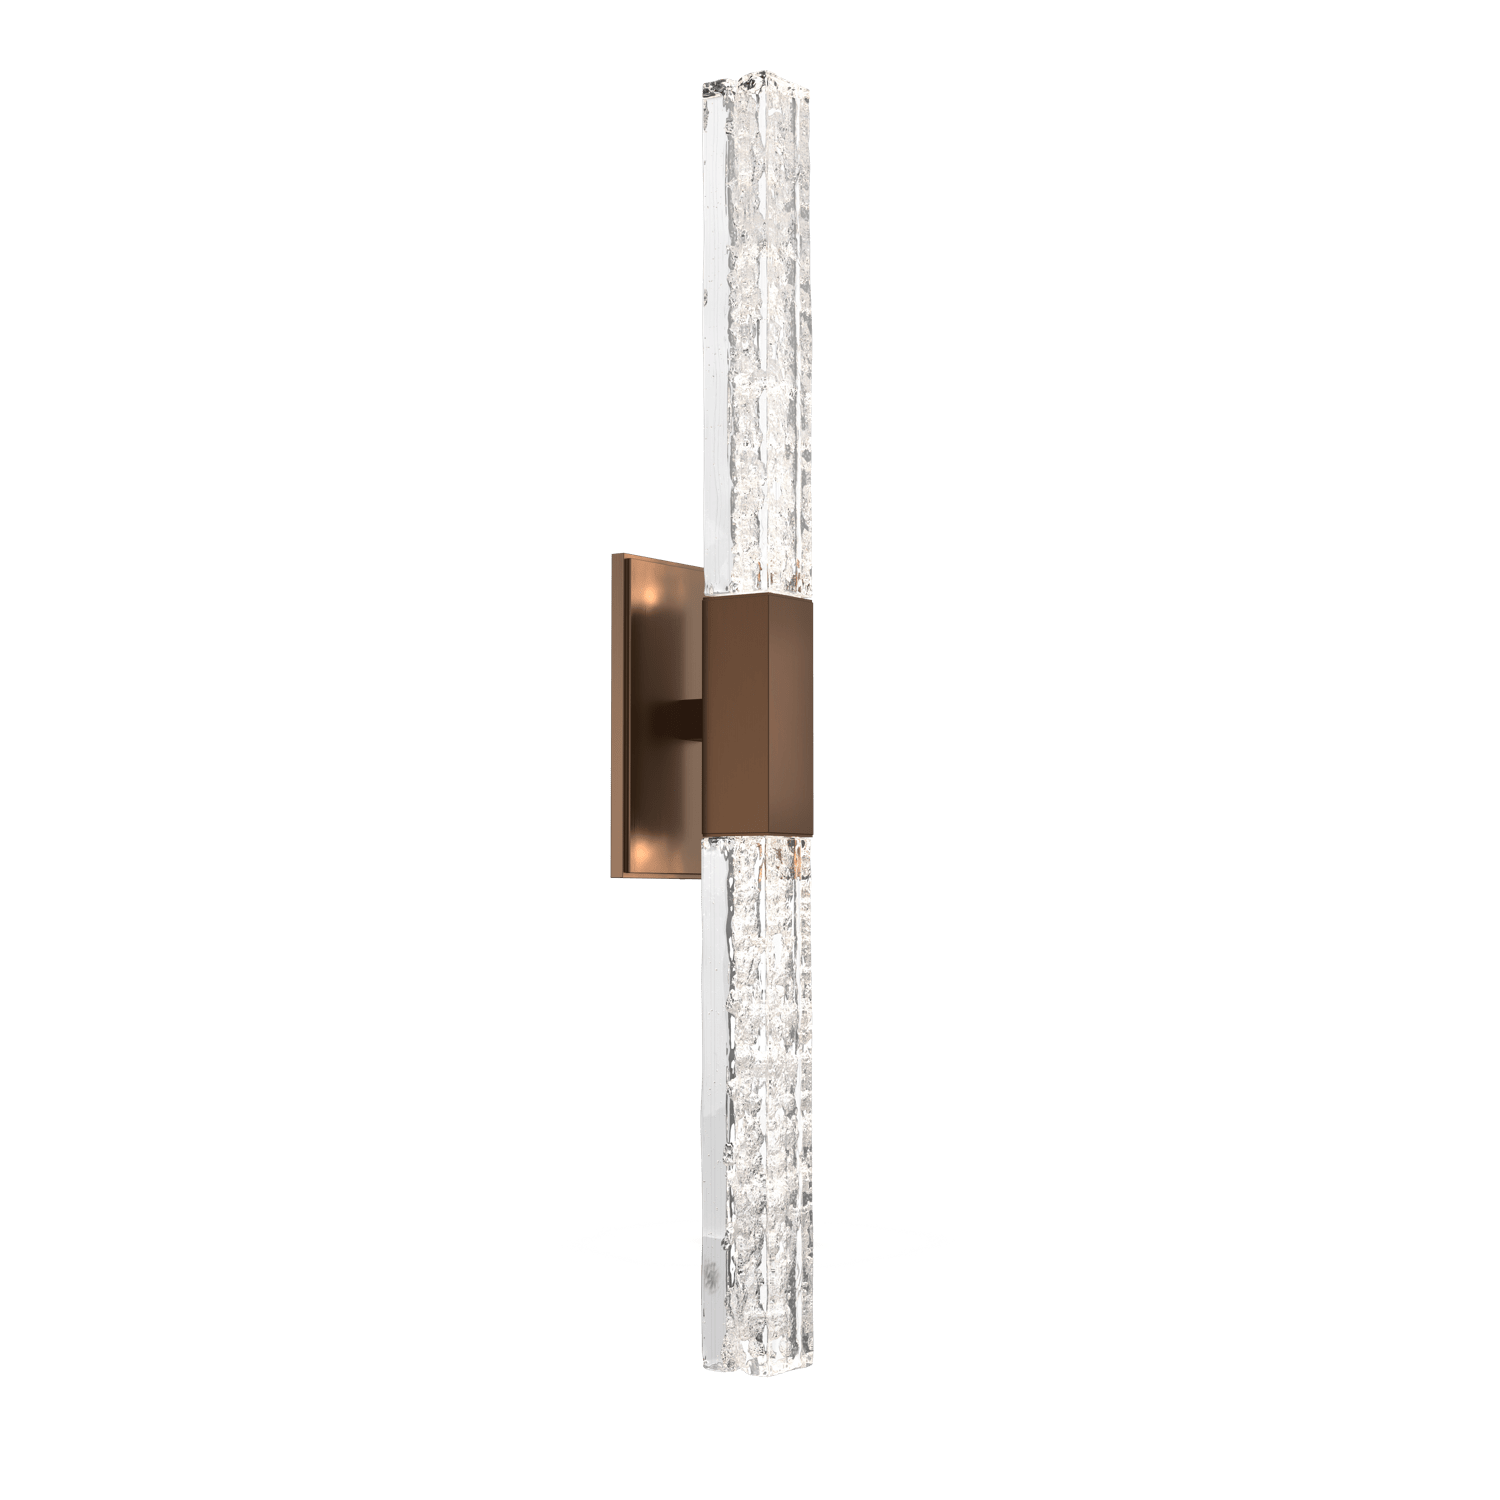 IDB0060-02-RB-GC-Hammerton-Studio-Axis-Double-Wall-Sconce-with-Oil-Rubbed-Bronze-finish-and-clear-cast-glass-and-LED-lamping